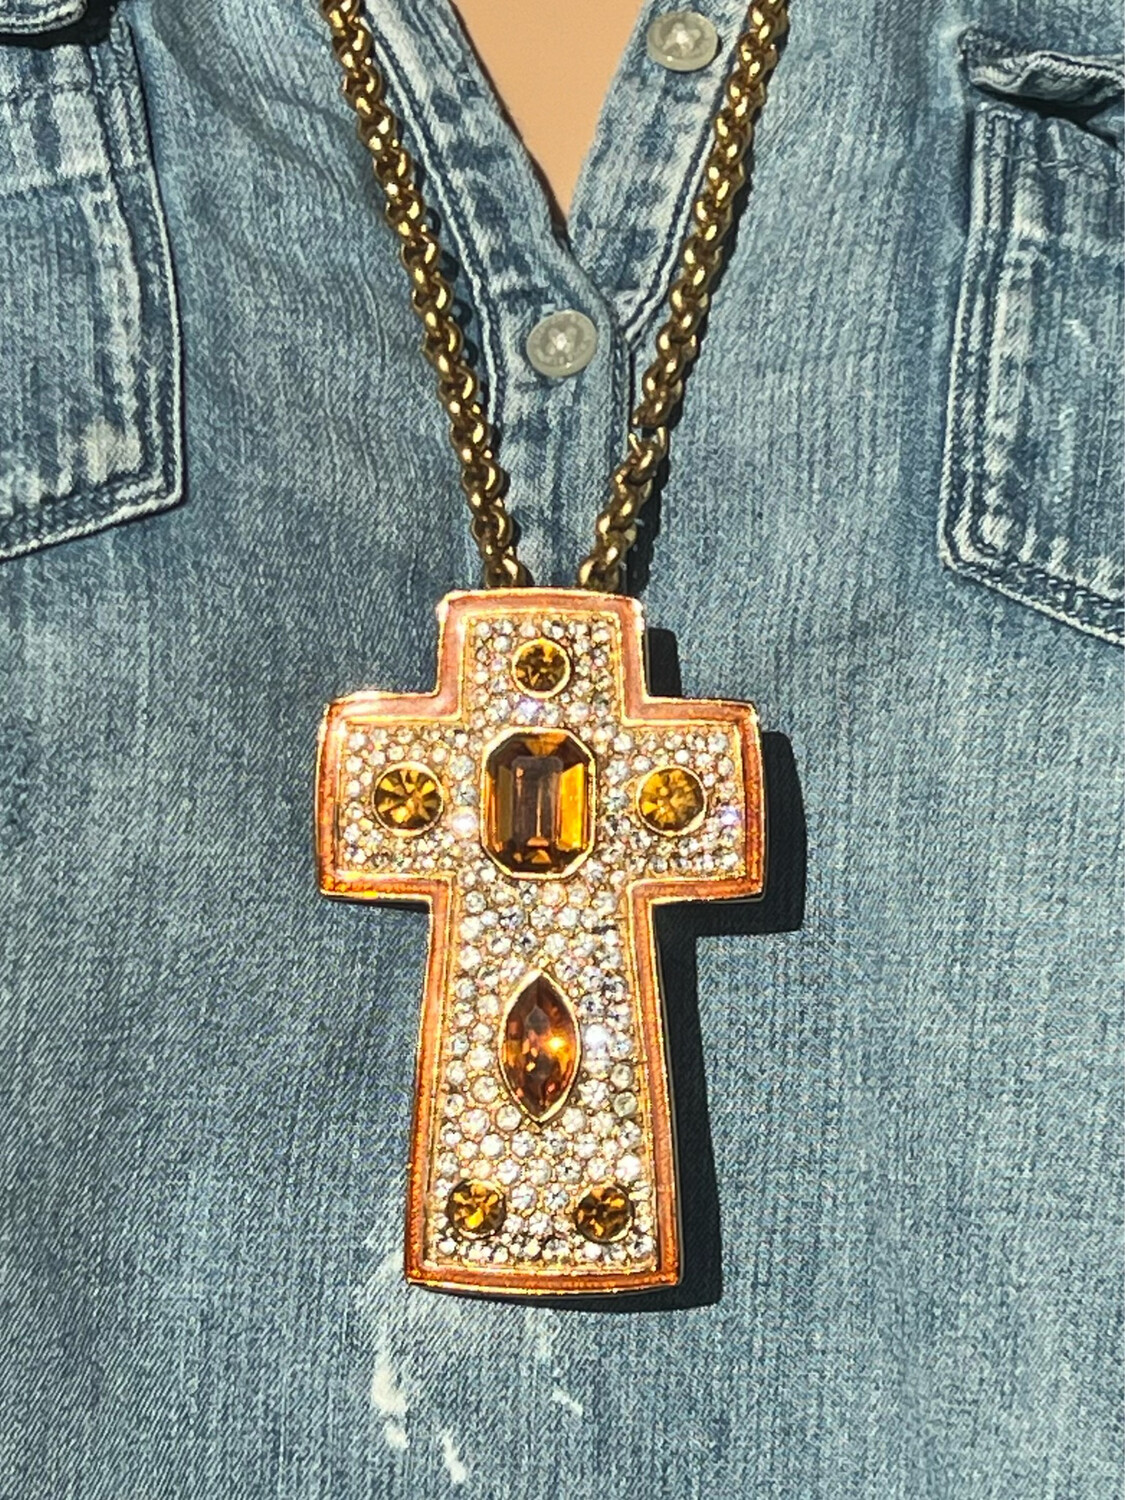 Christian Dior brooch pendant cross with chain